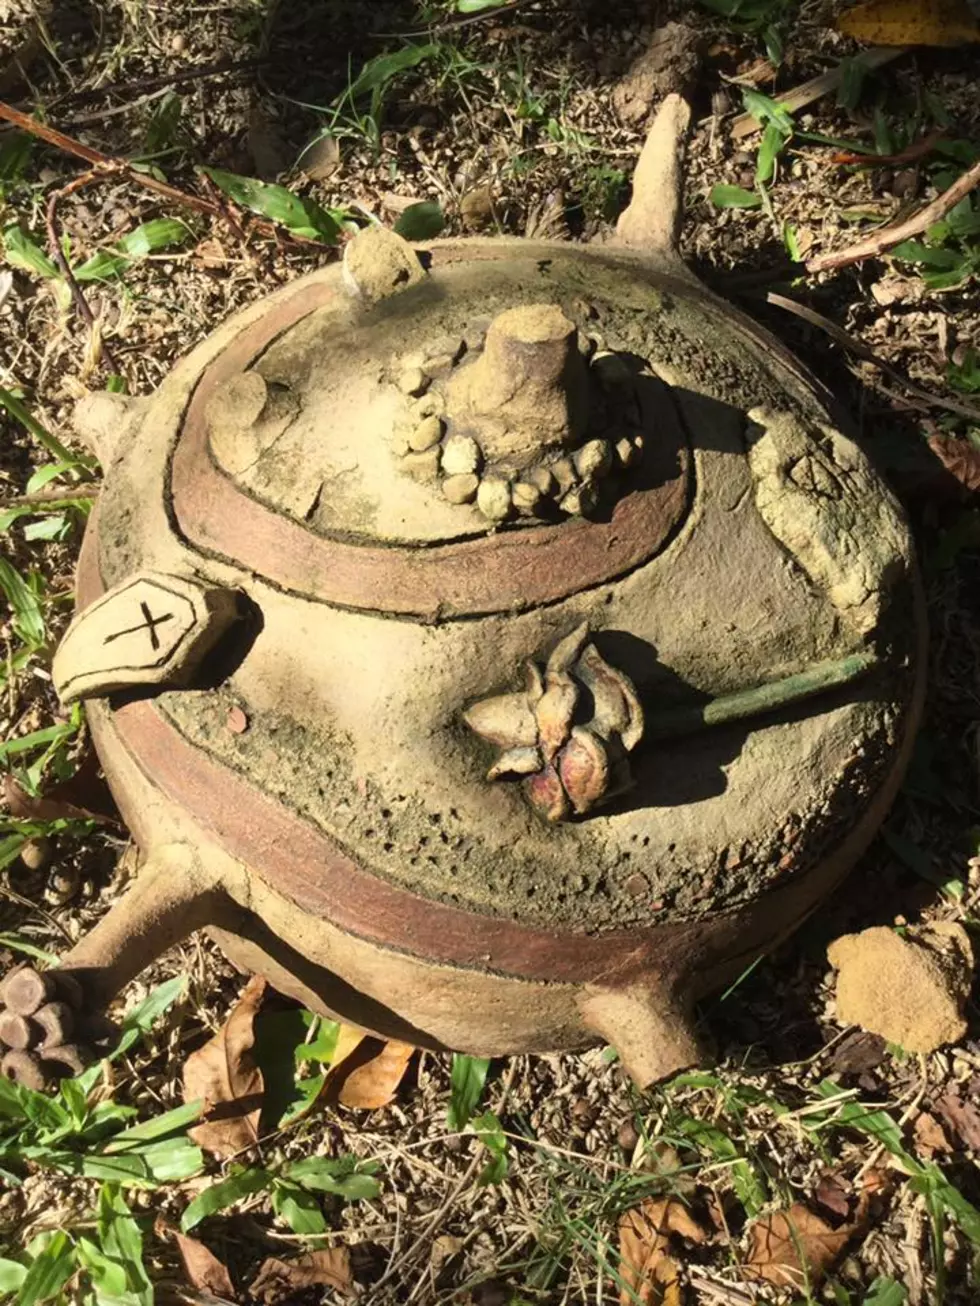 What Would You Do If You Found This Creepy Thing Buried In Your Yard?